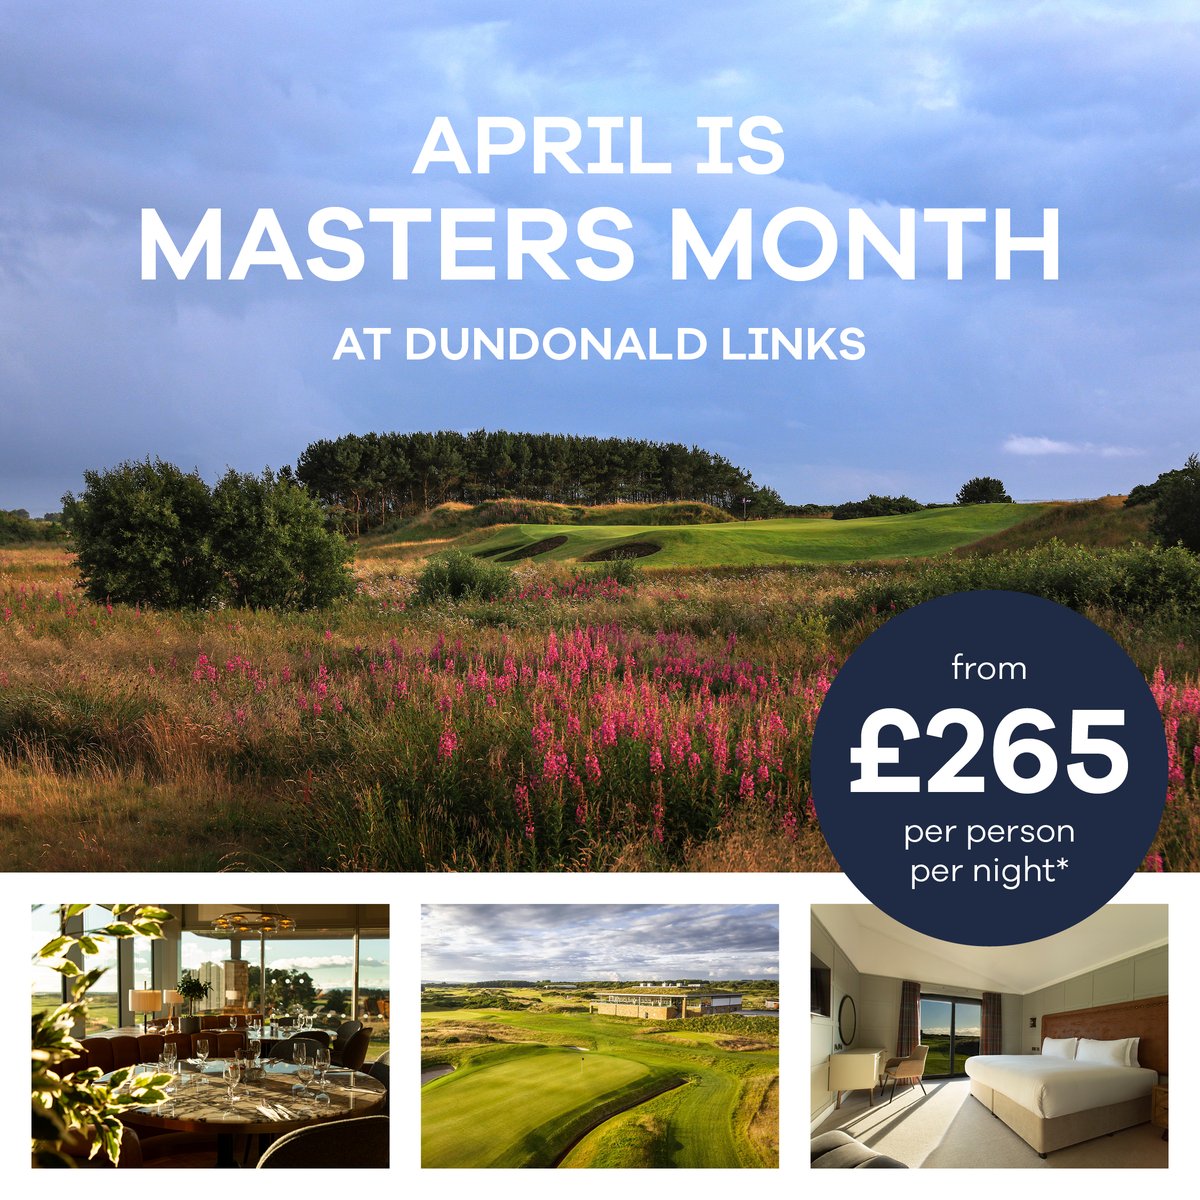 A few short days until the Masters ⛳but there’s still time to book and relax with us. April is Masters Month at Dundonald Links in Ayrshire: our renowned course and hospitality, a luxury room, and menu inspired by great Masters moments. Find out more and book on 01294 314 000